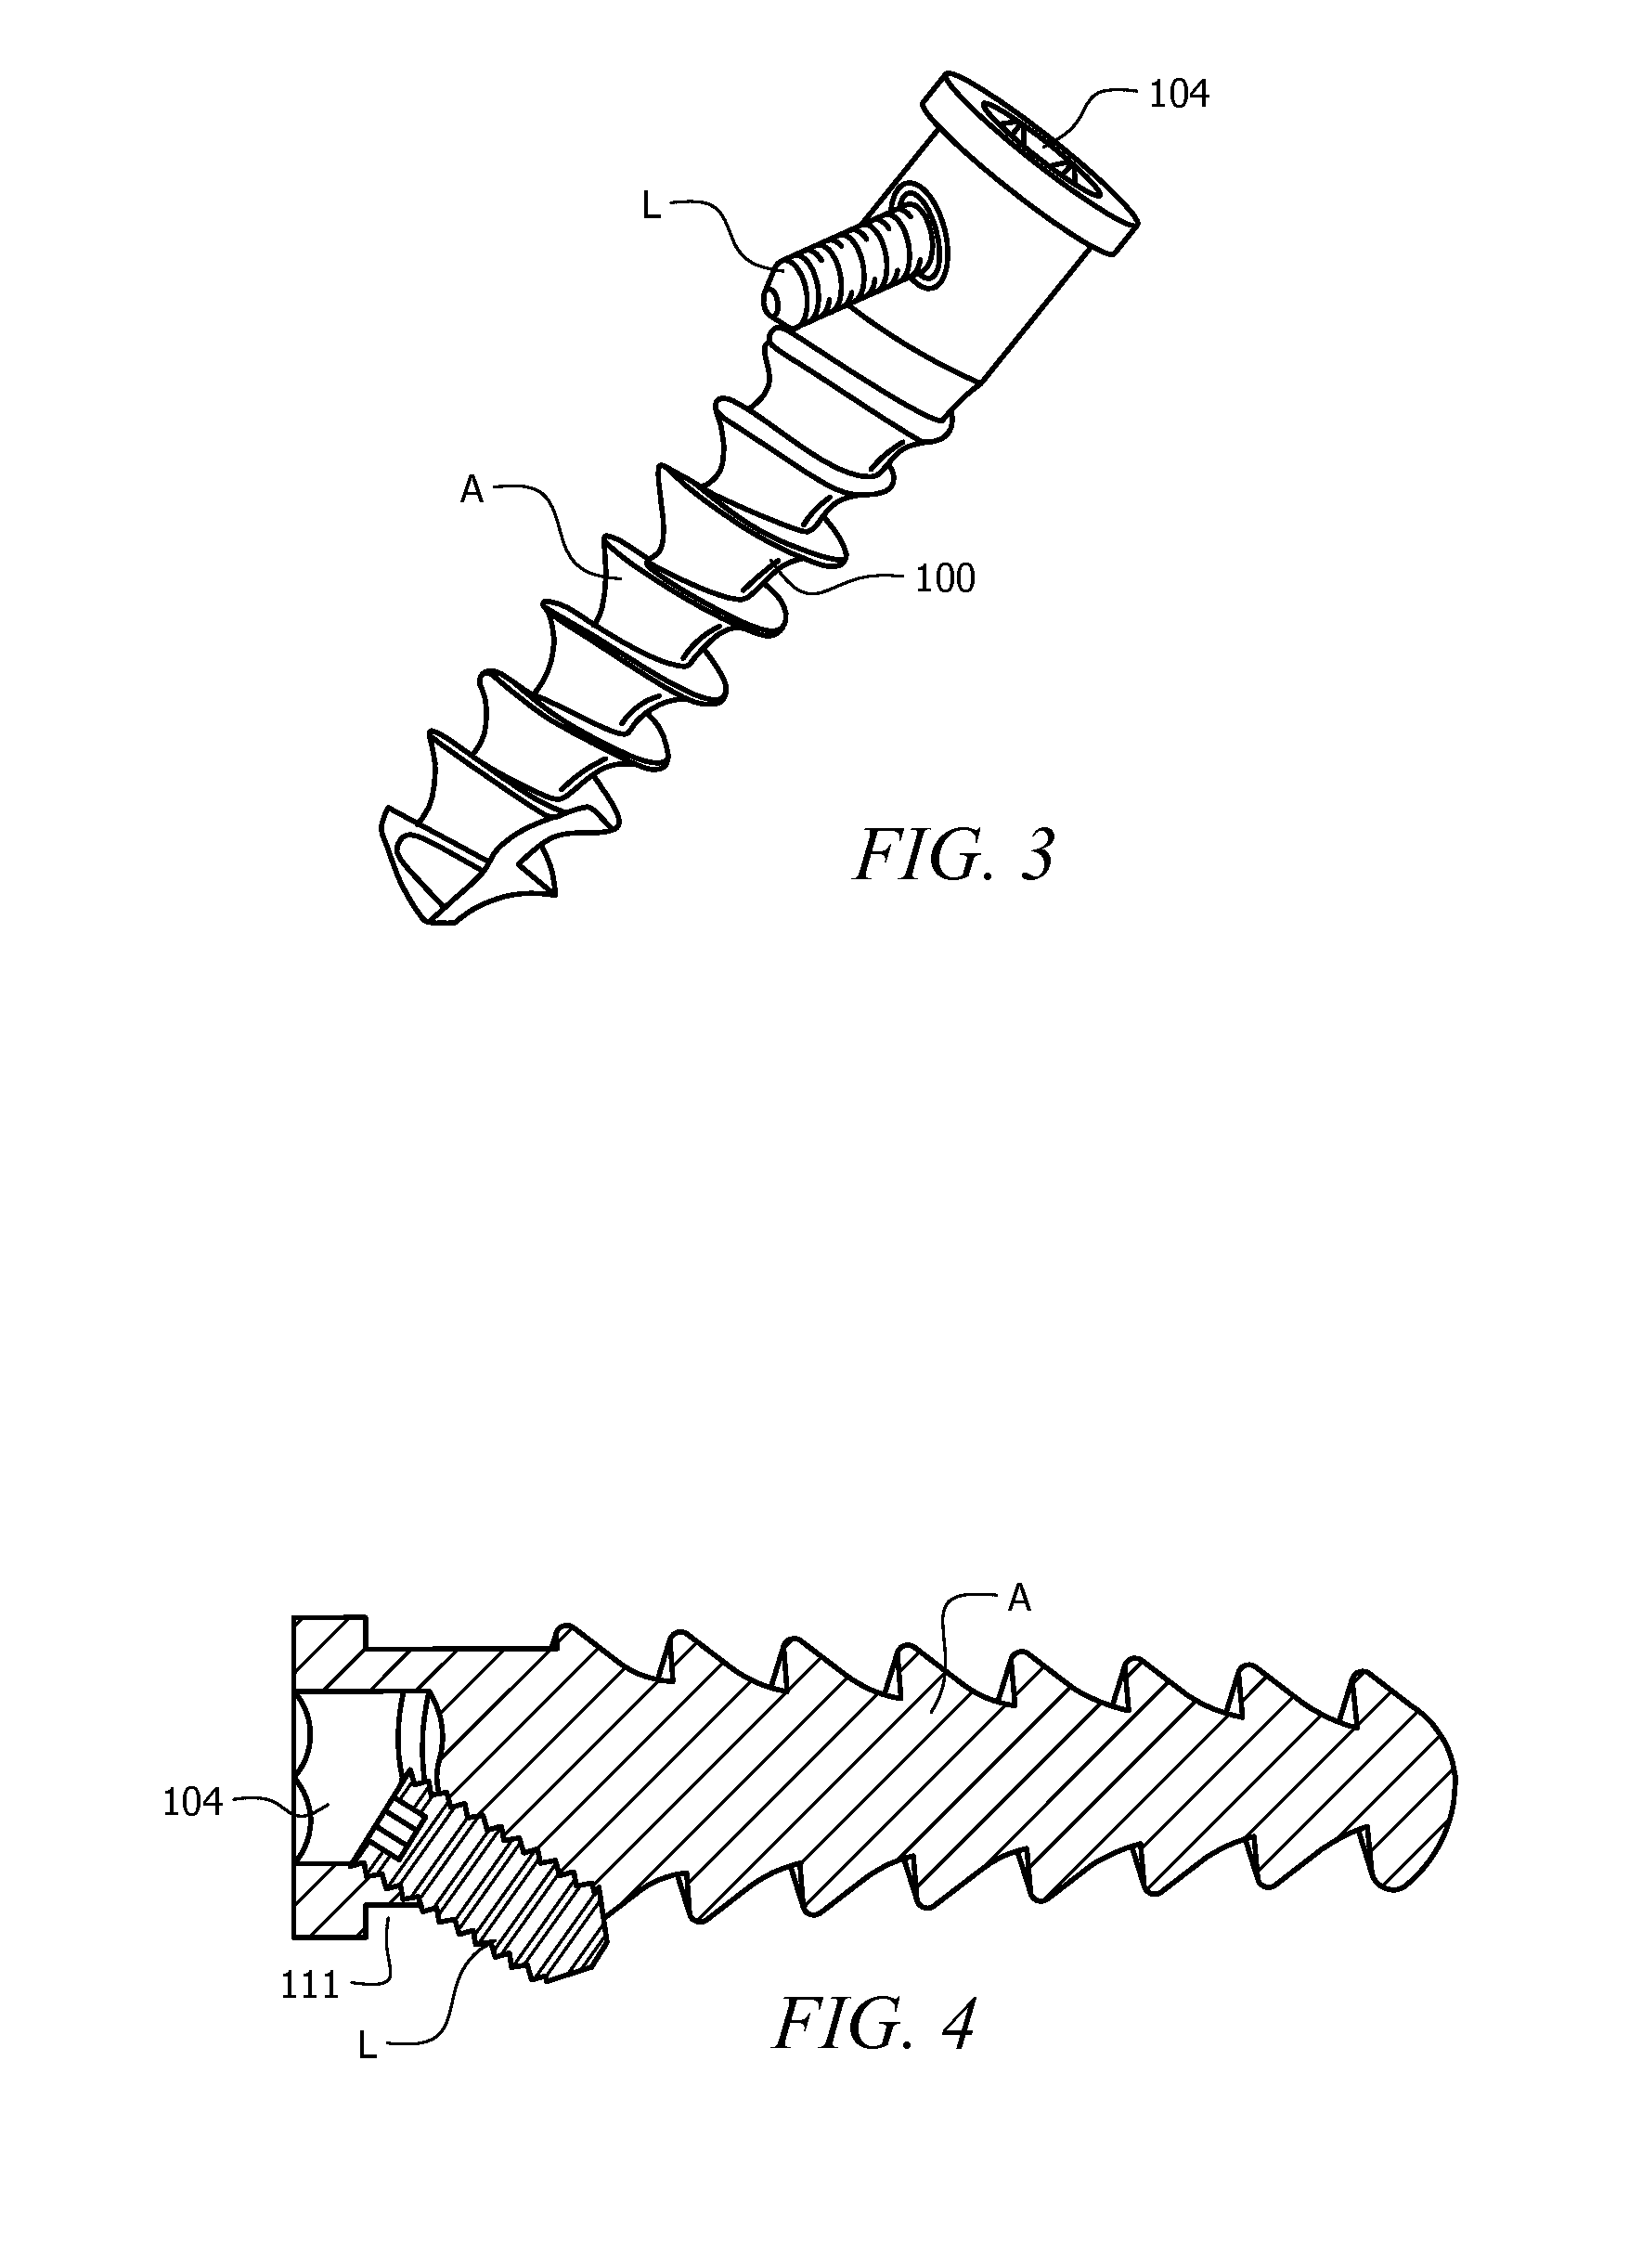 Universal anchor for attaching objects to bone tissue